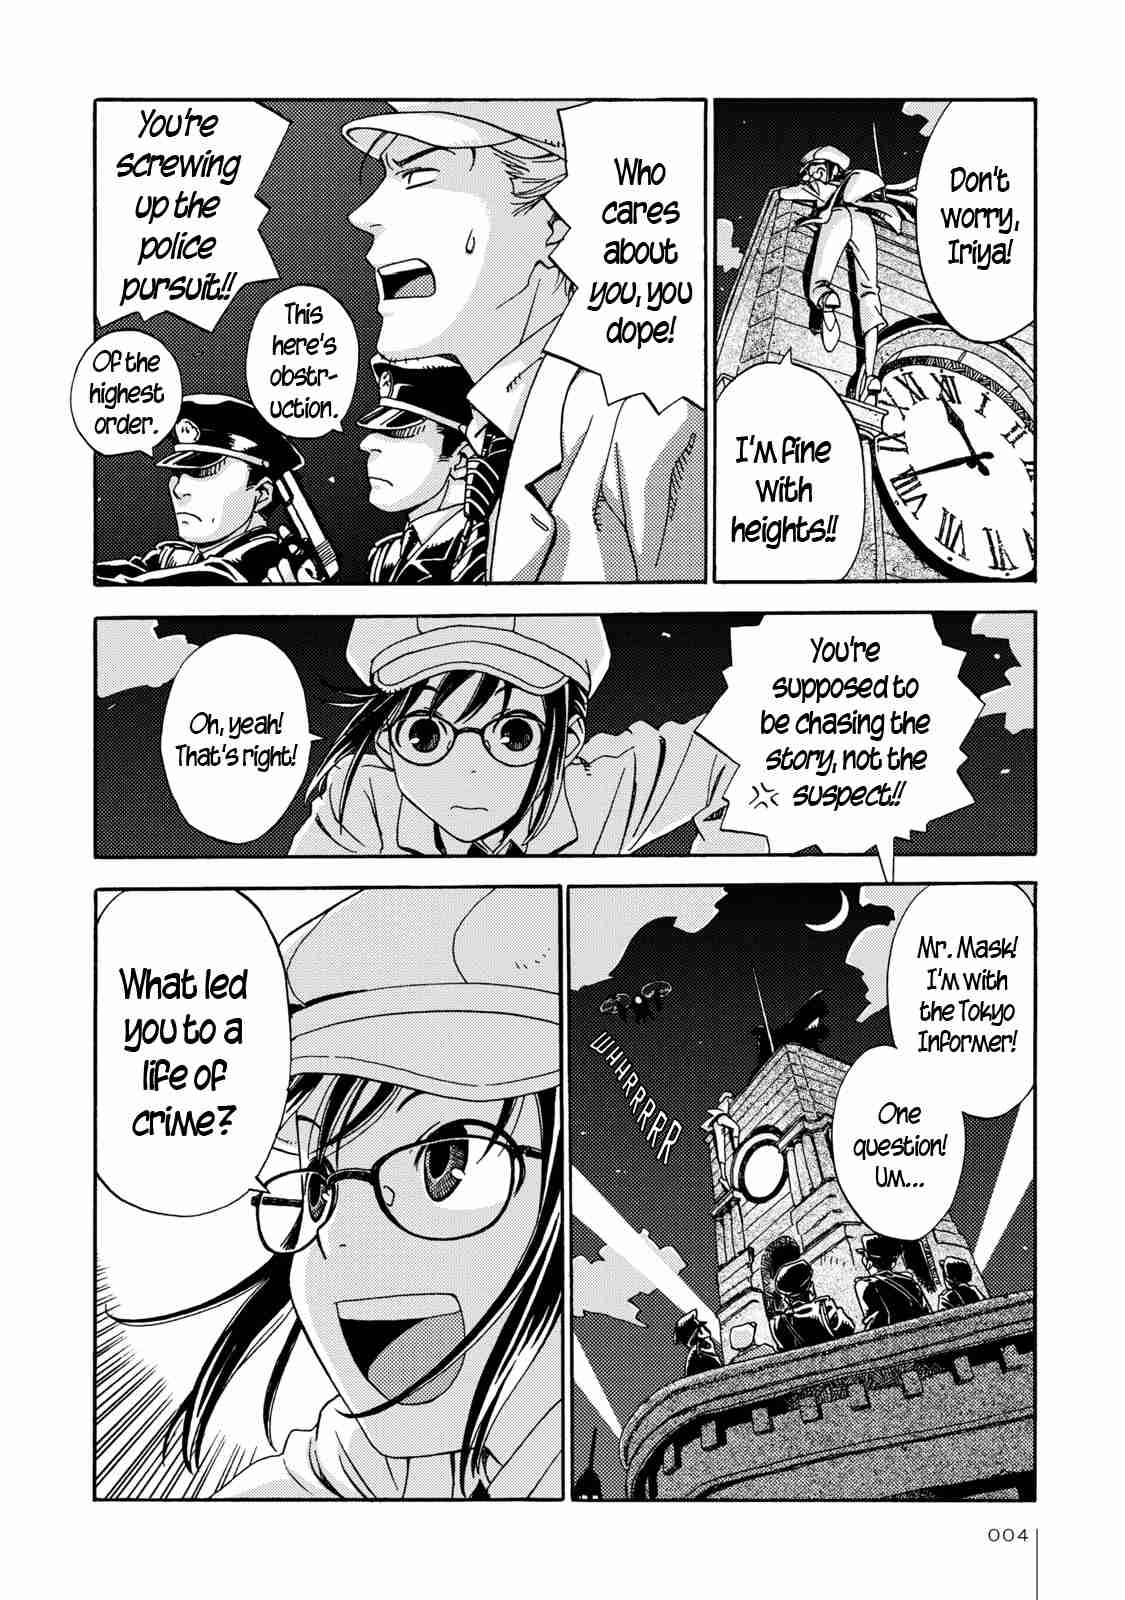 The Adventures of Totoko, Investigative Reporter Vol. 1 Ch. 1 Totoko Pursues the Midnight Mask, and The Scoop Search